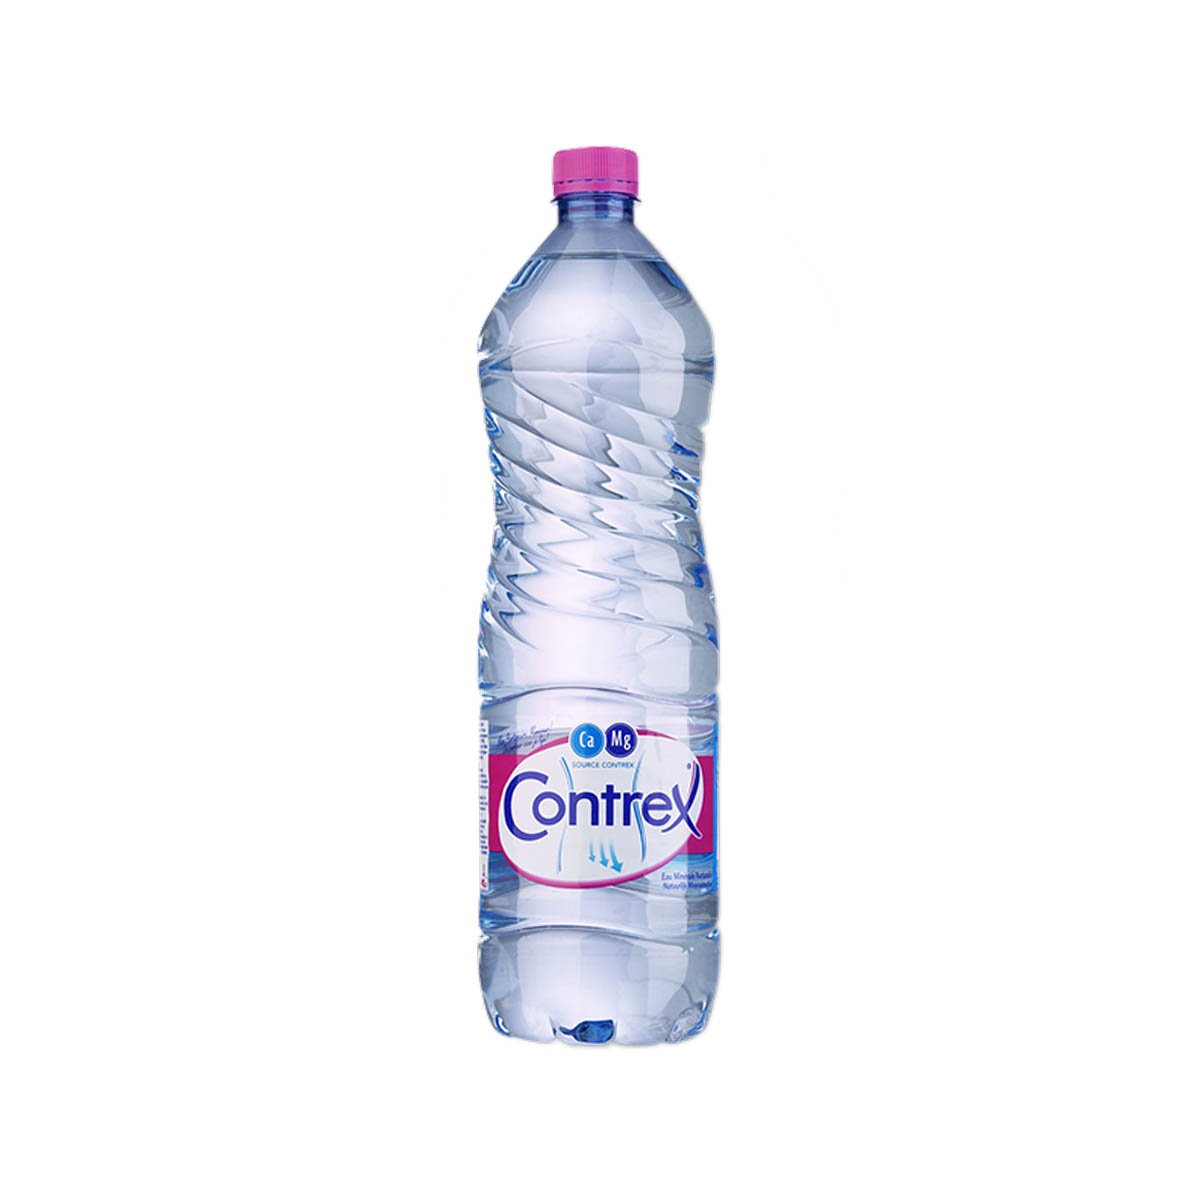 Contrex Natural mineral water 1.5L